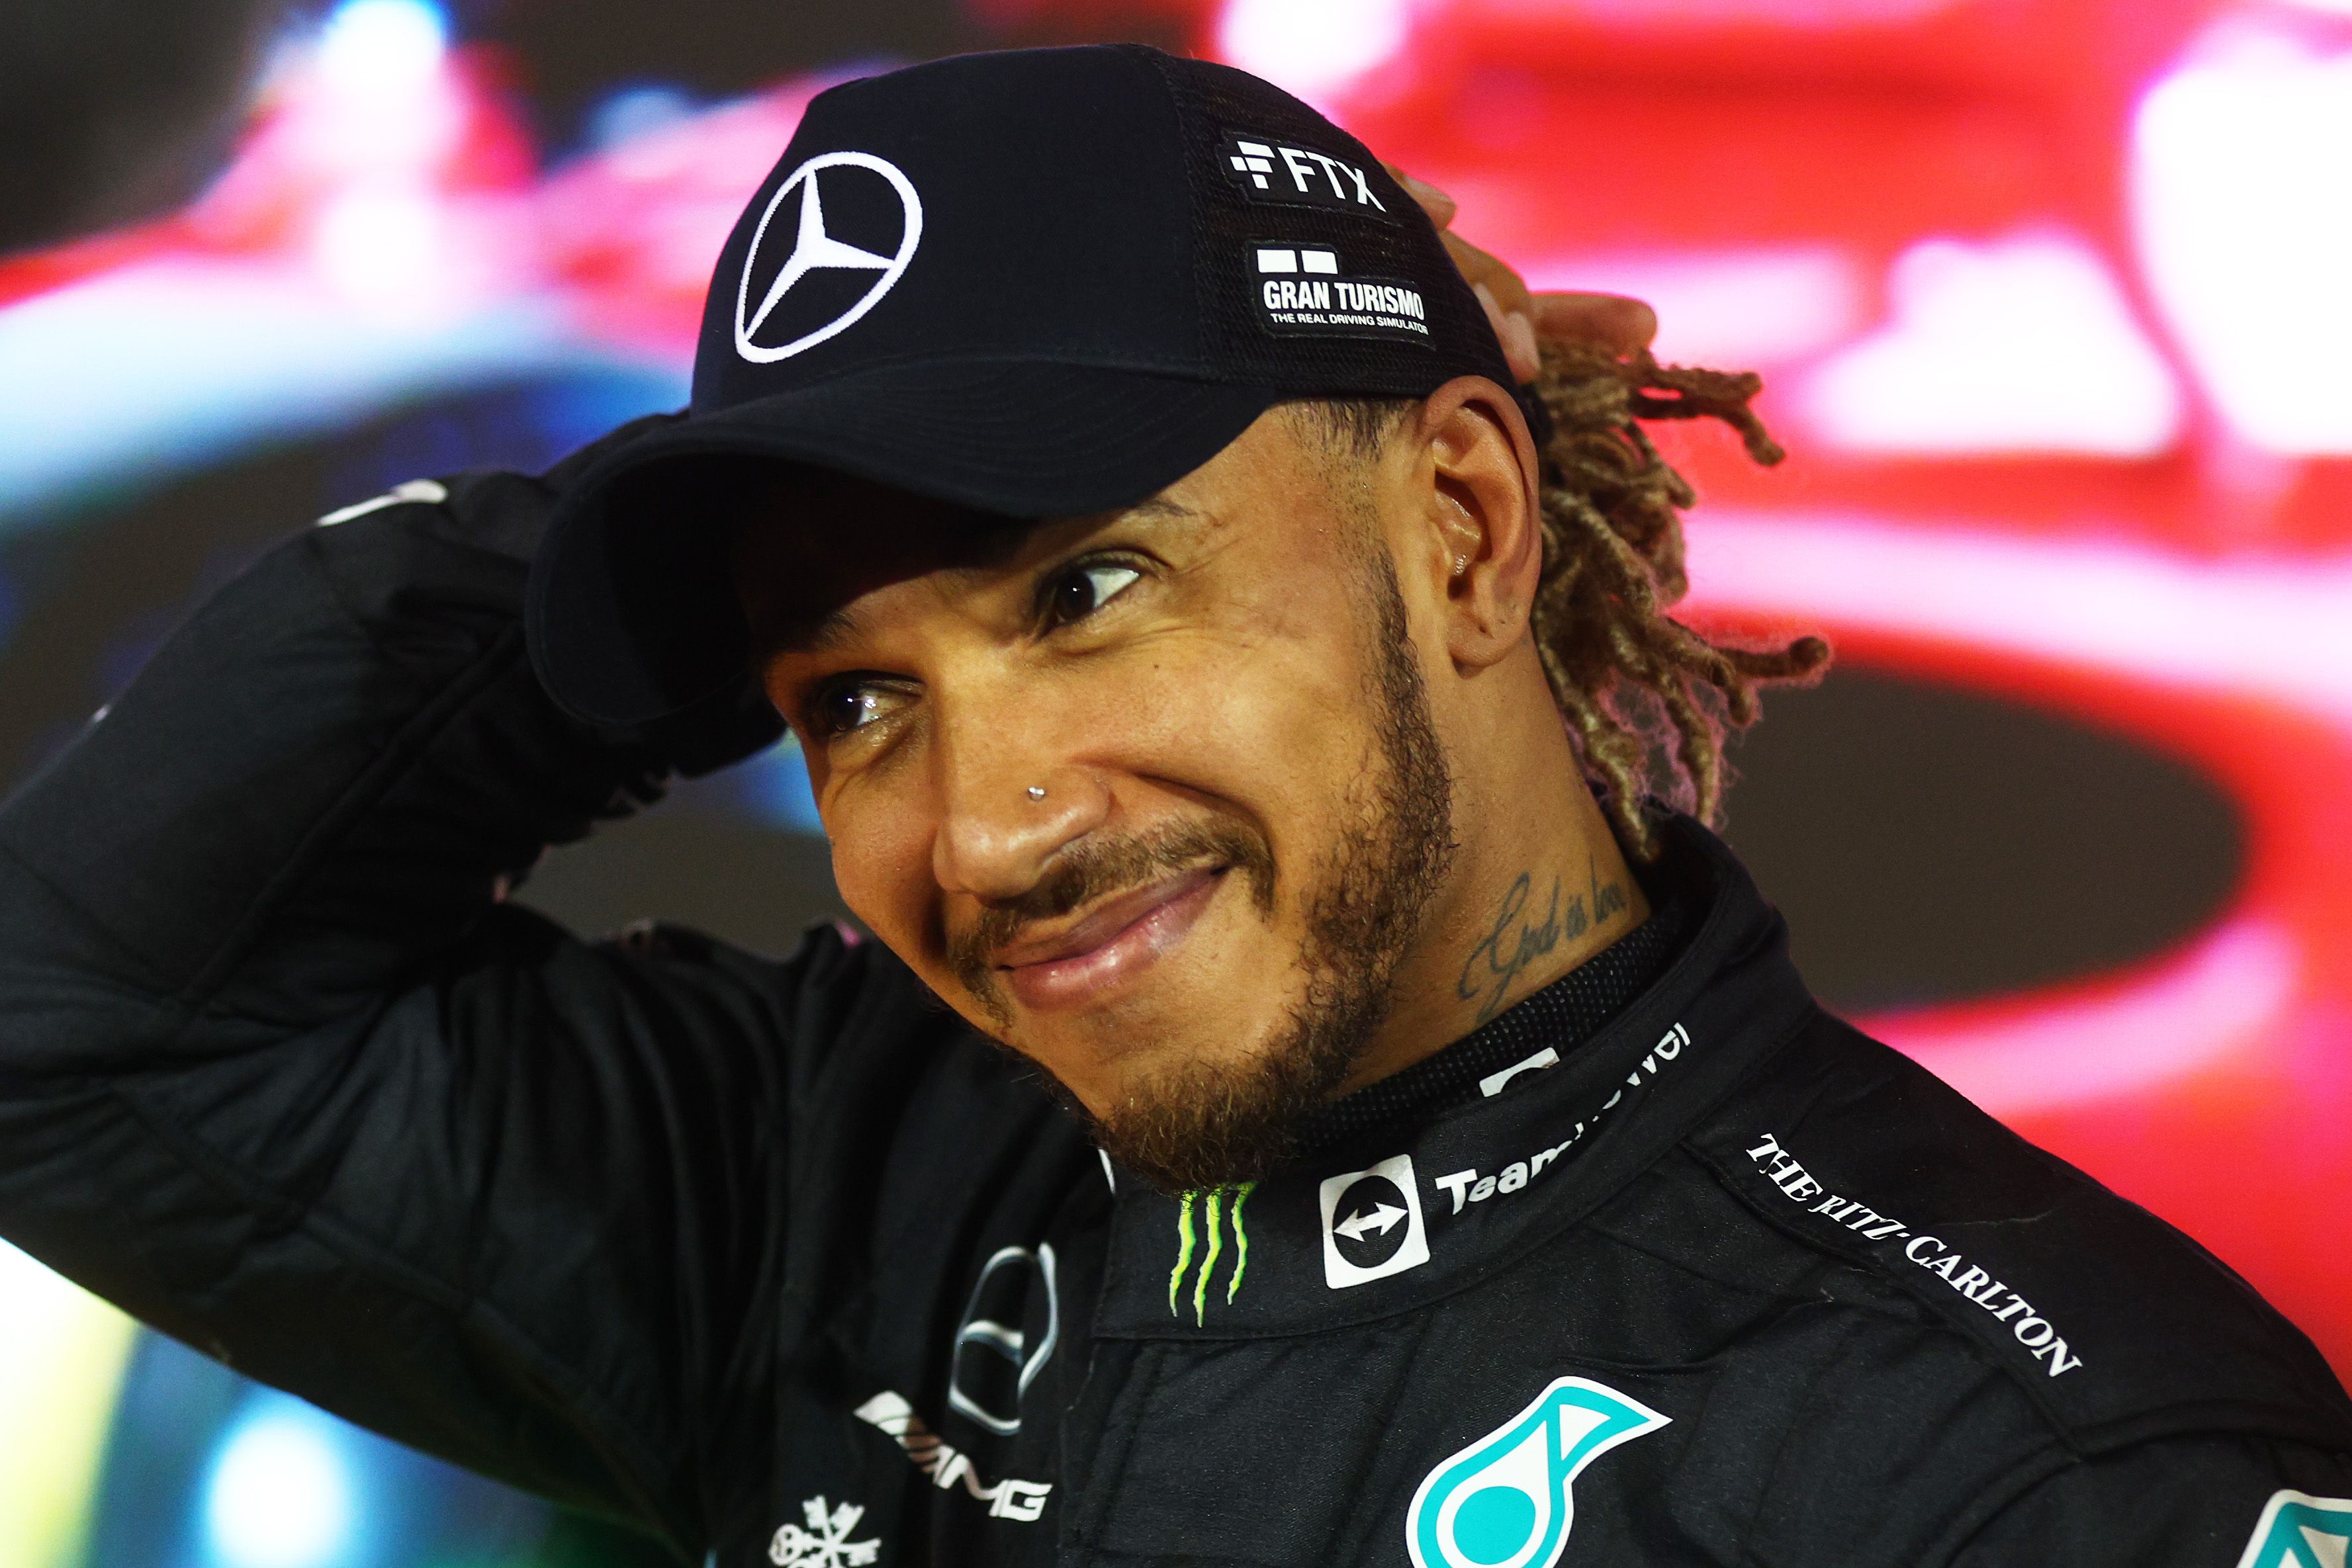 Read The Full Report Here No Apologies To Hamilton For F1 Abu Dhabi Gp Debacle